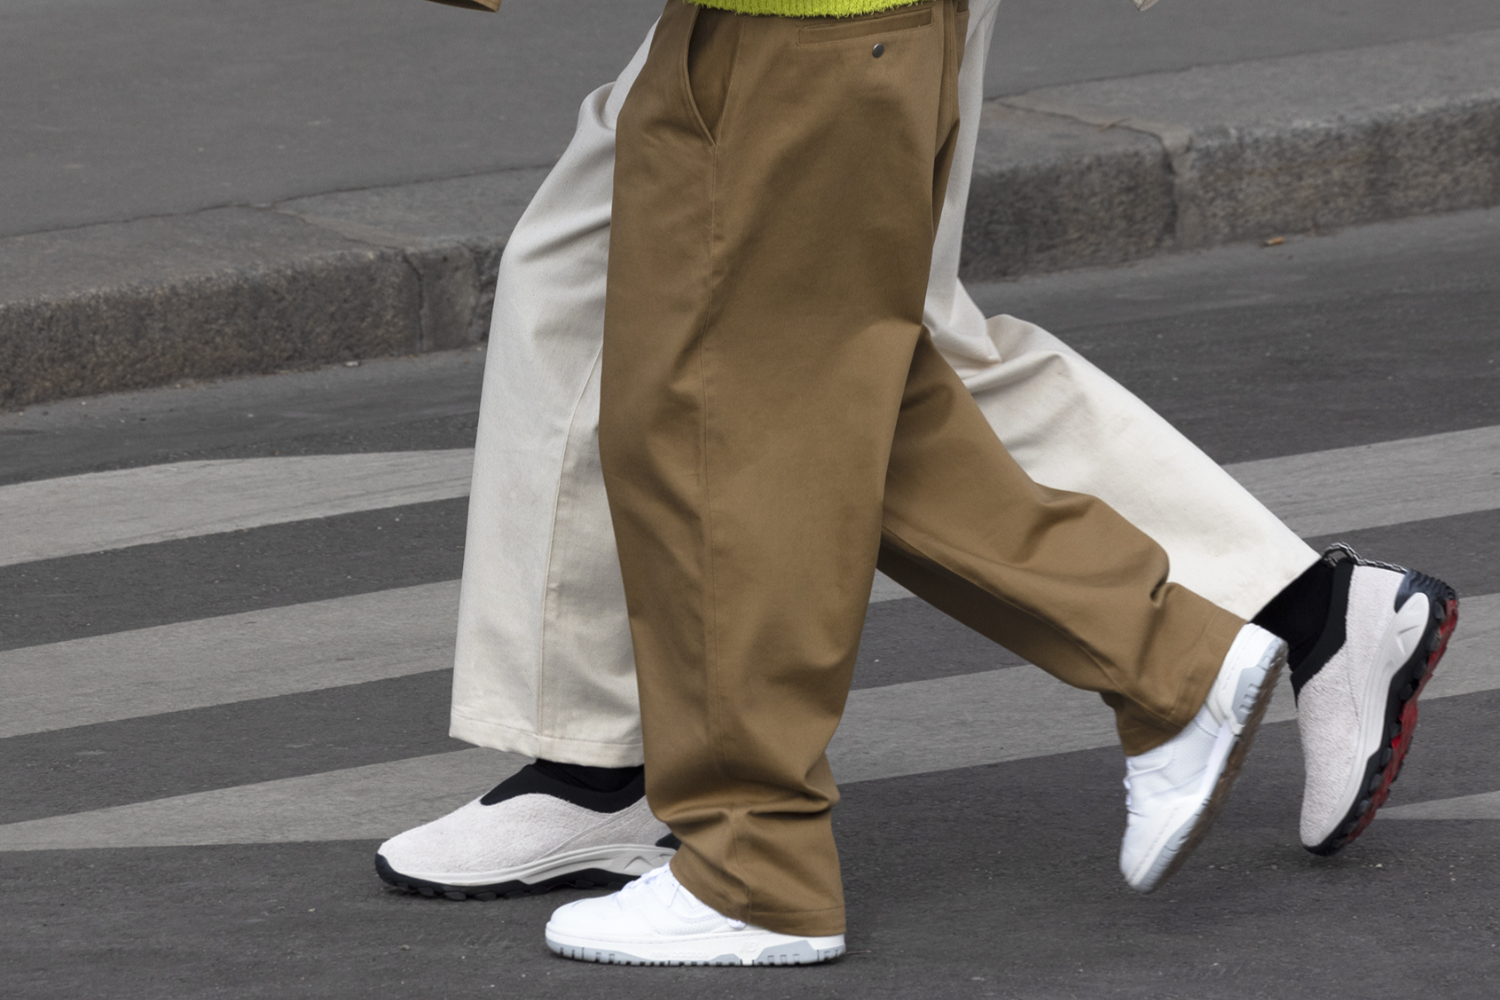 The Best Pants for Men to Wear in 2023